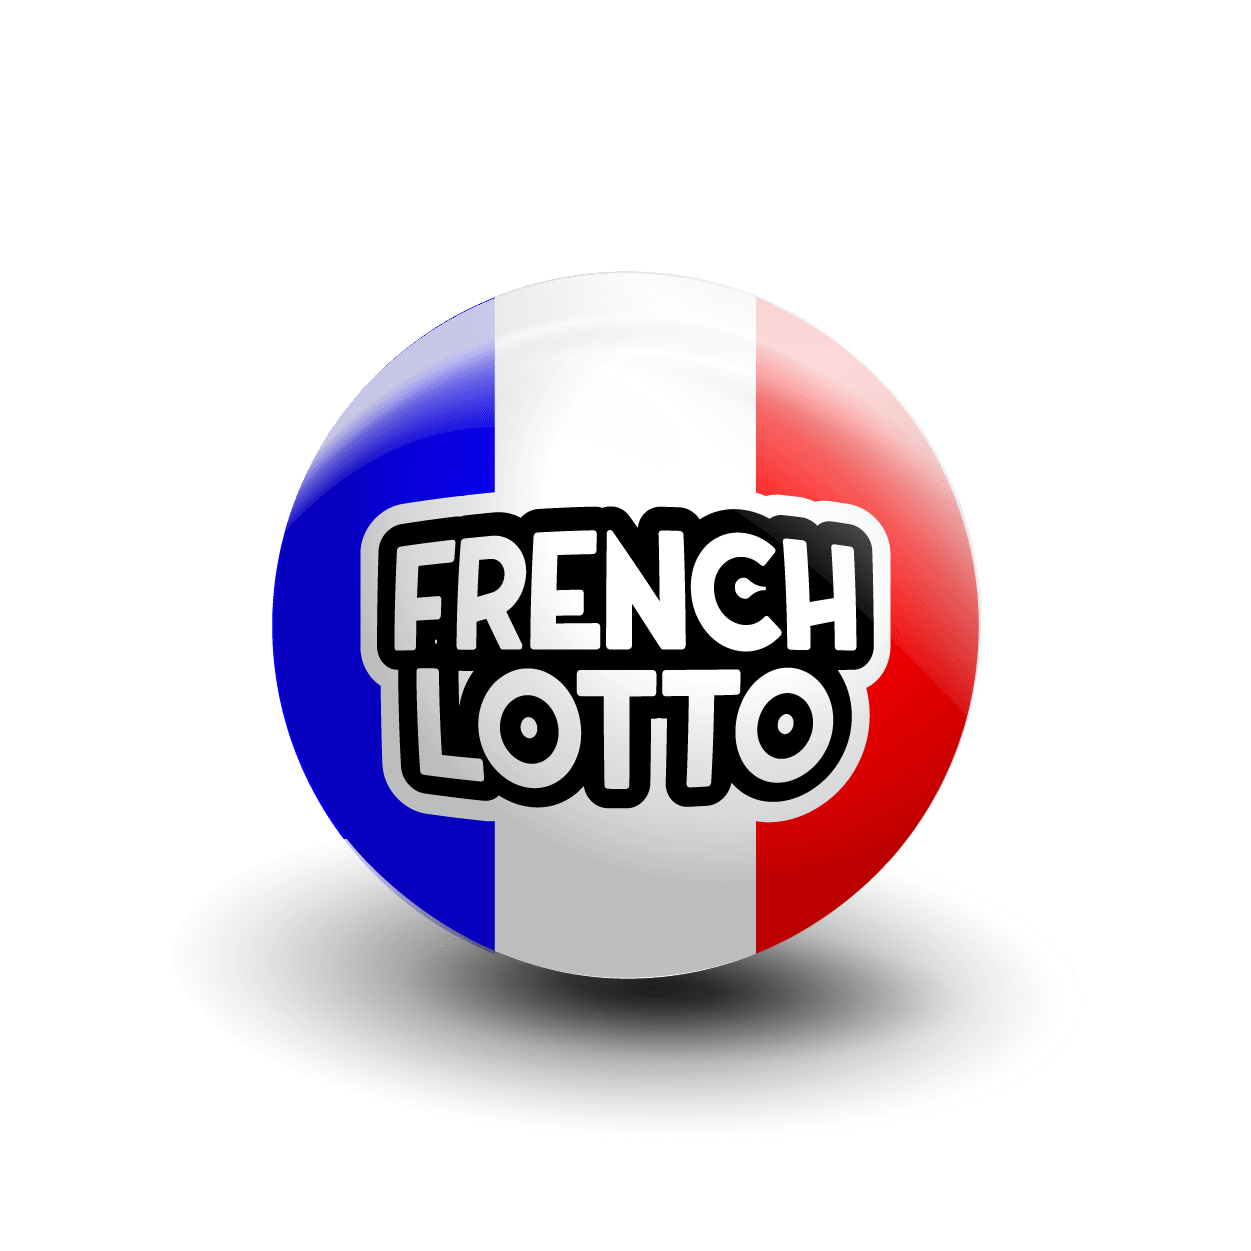 France Lotto / French Loto